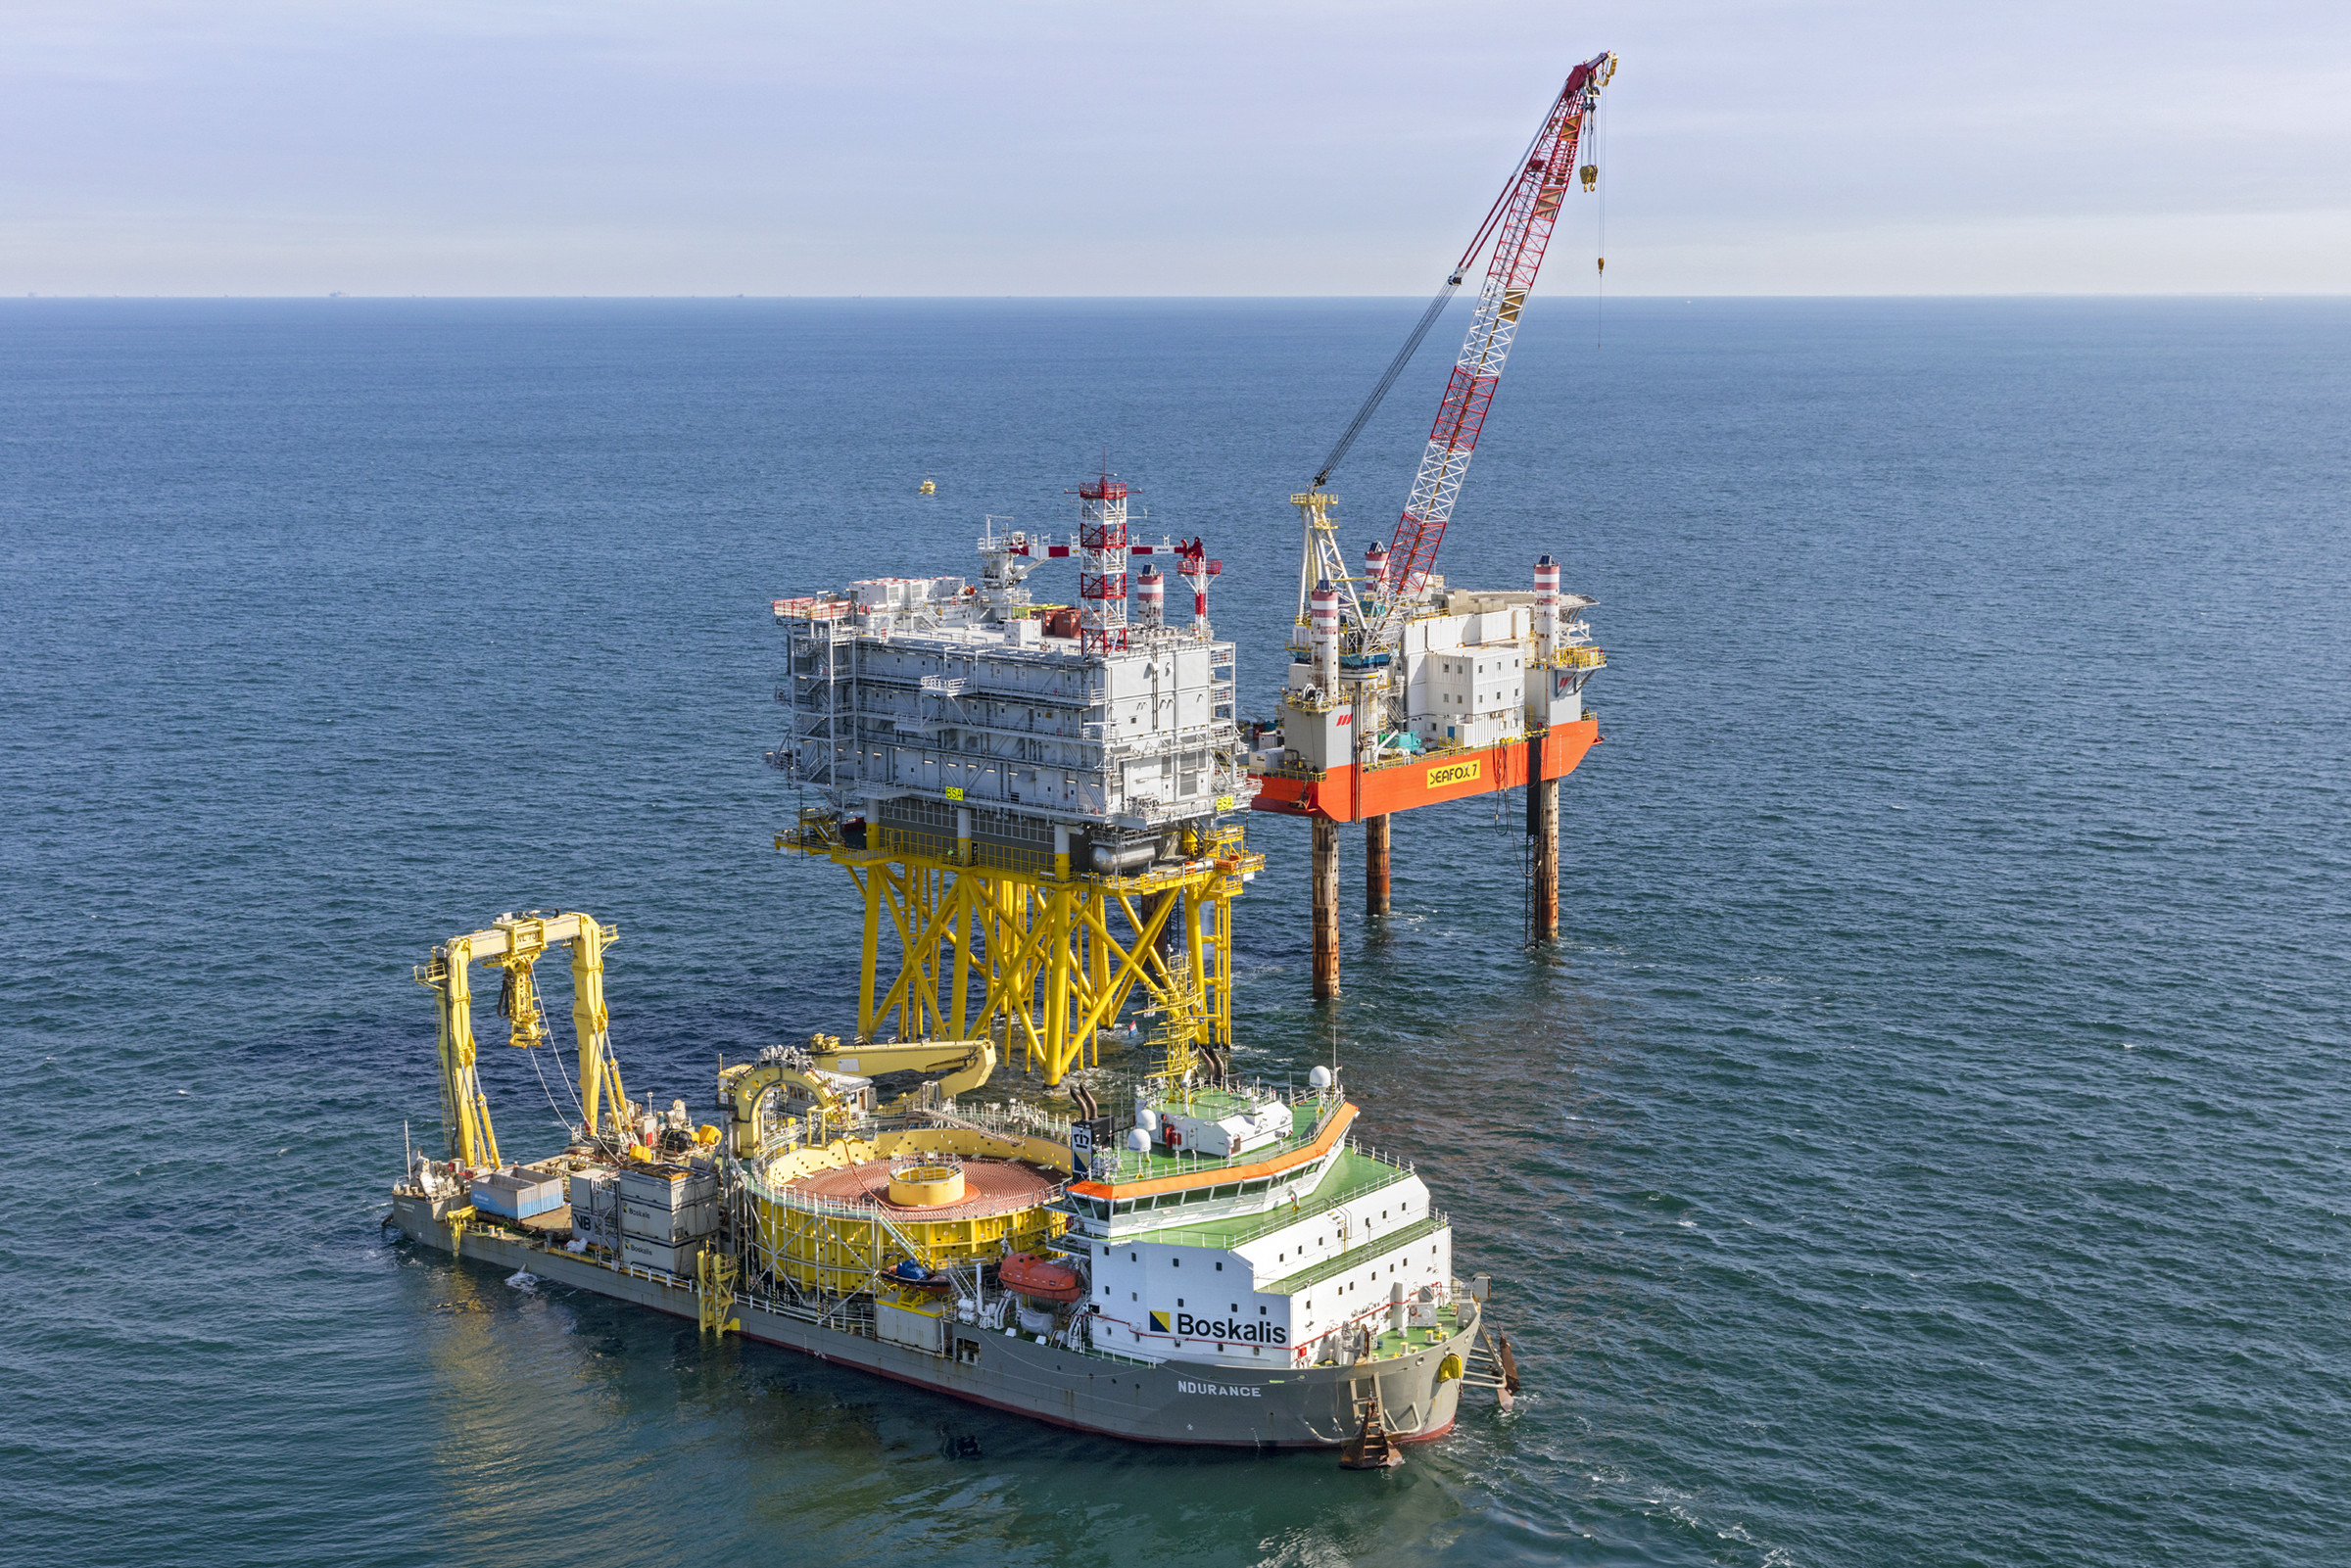 Cable-laying activities by the Ndurance in the offshore section